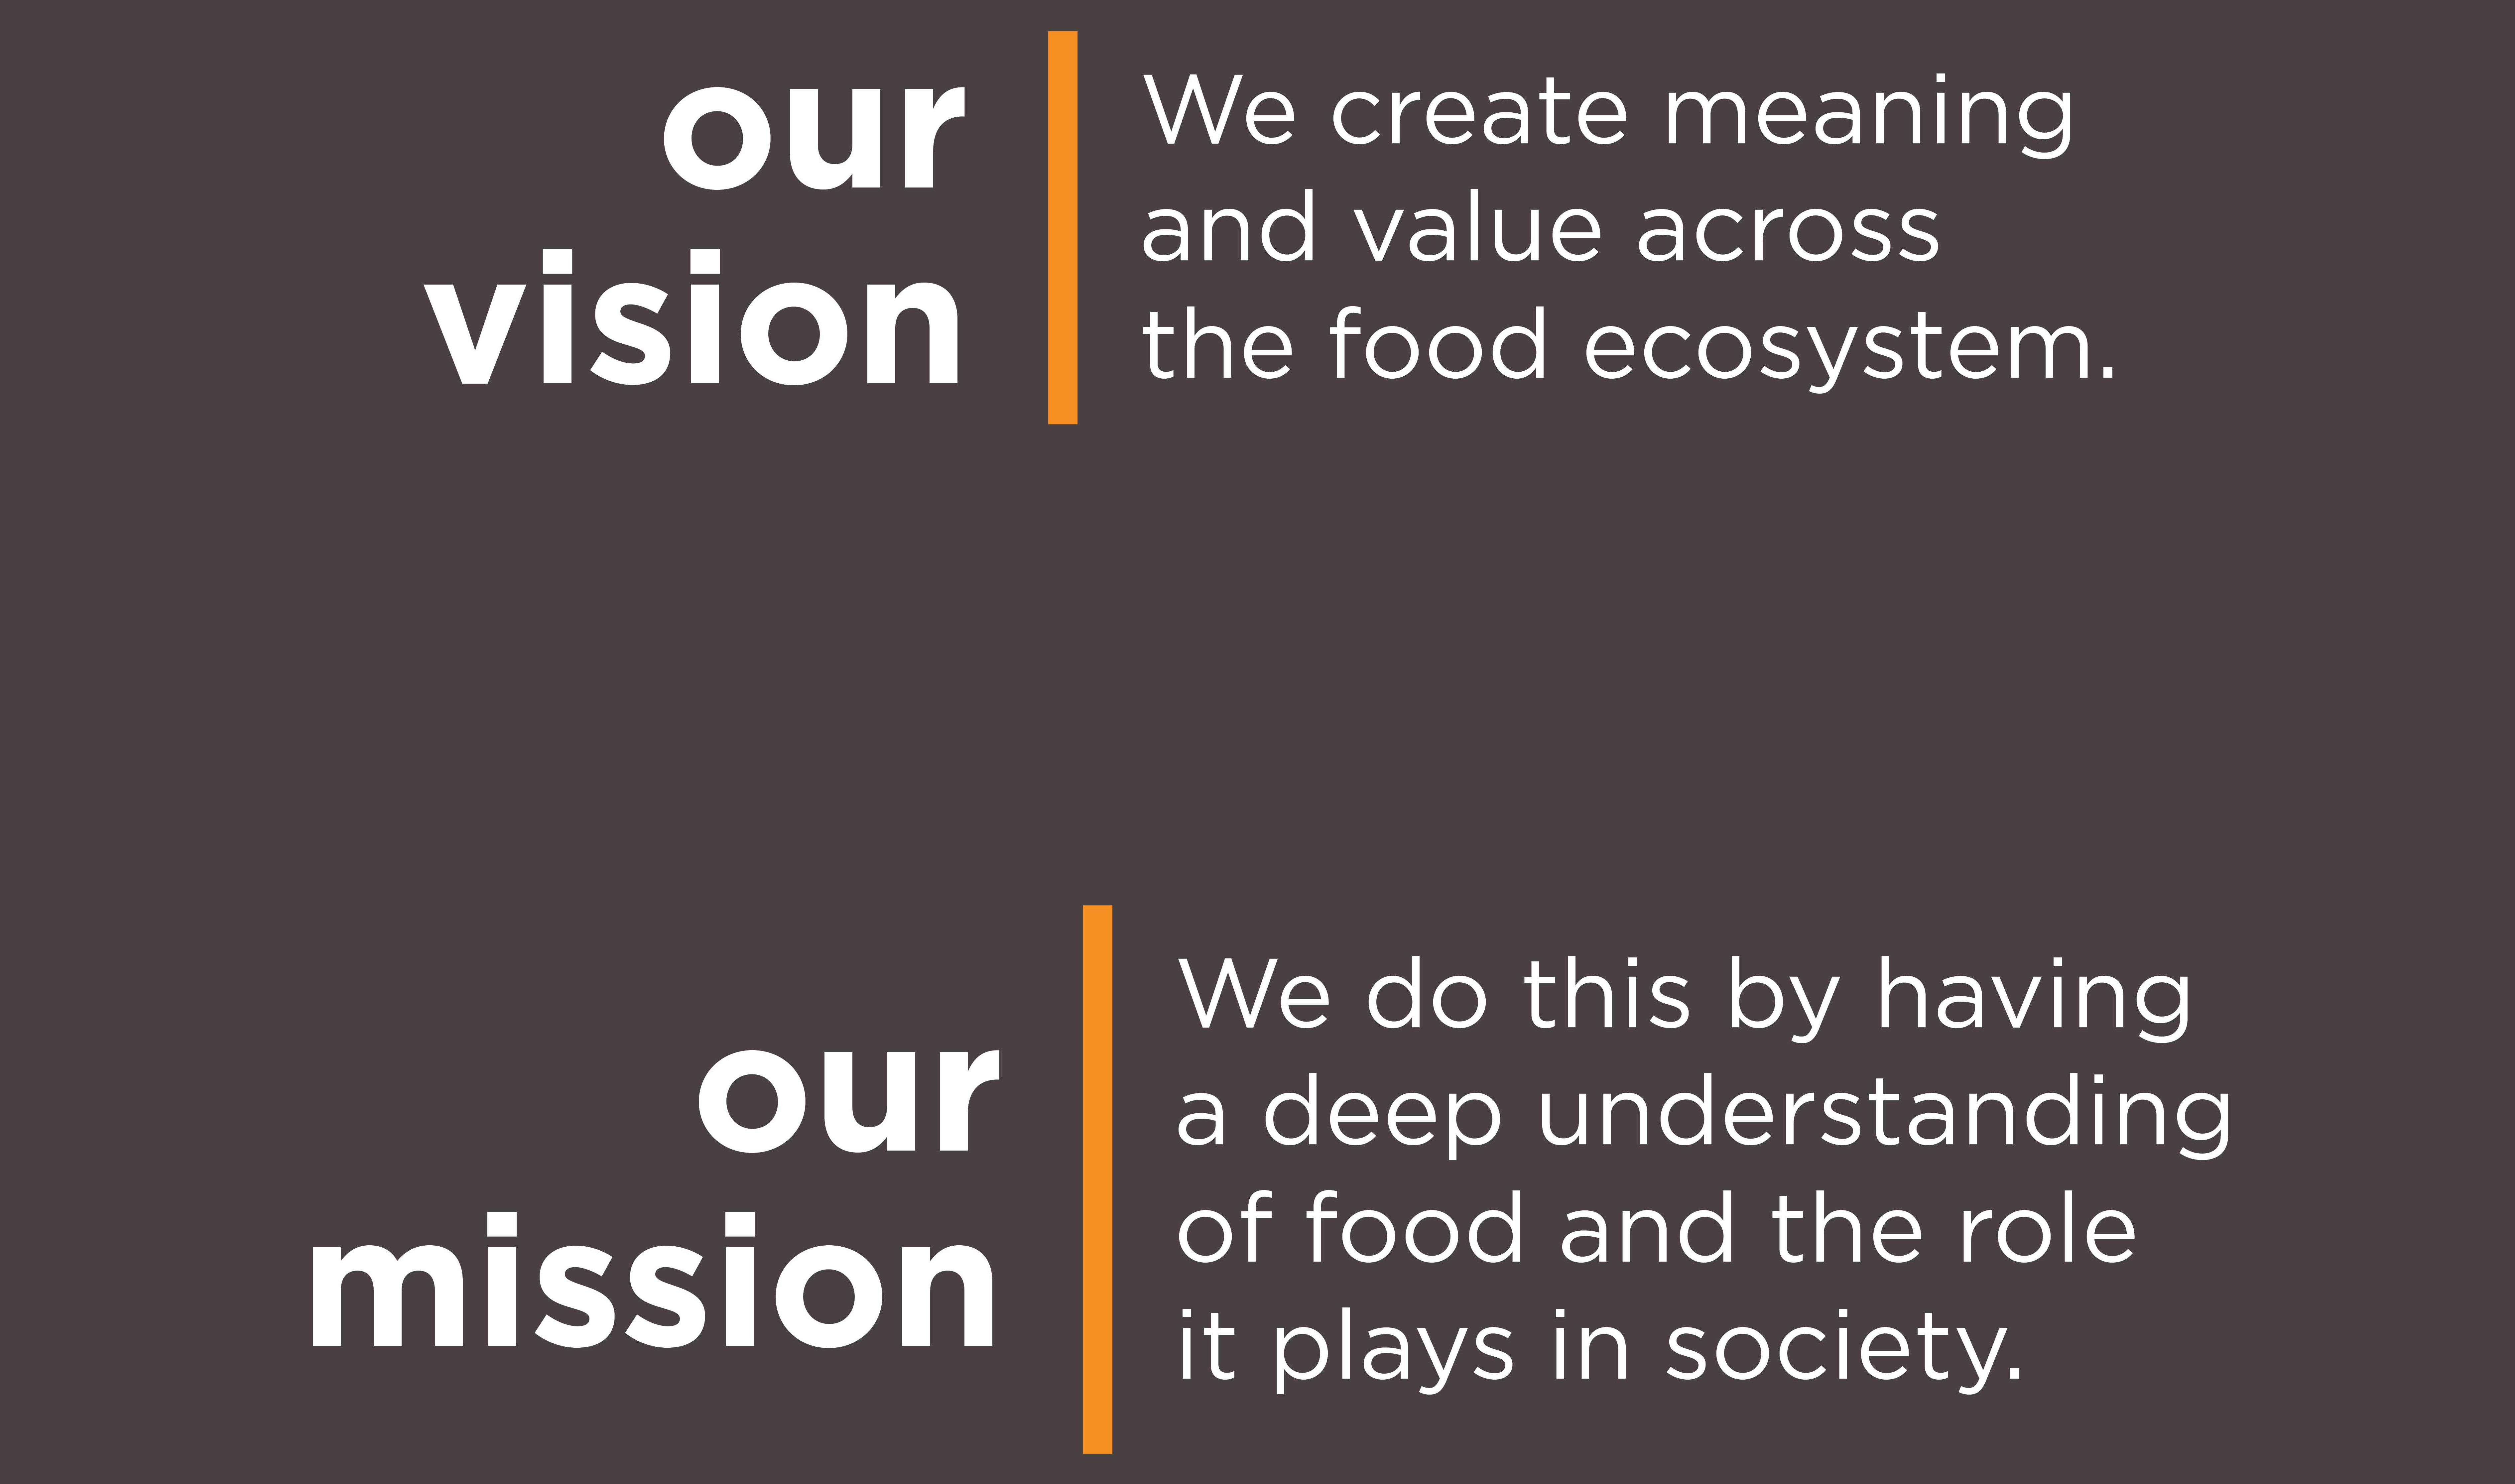 Nourish vision and mission statements